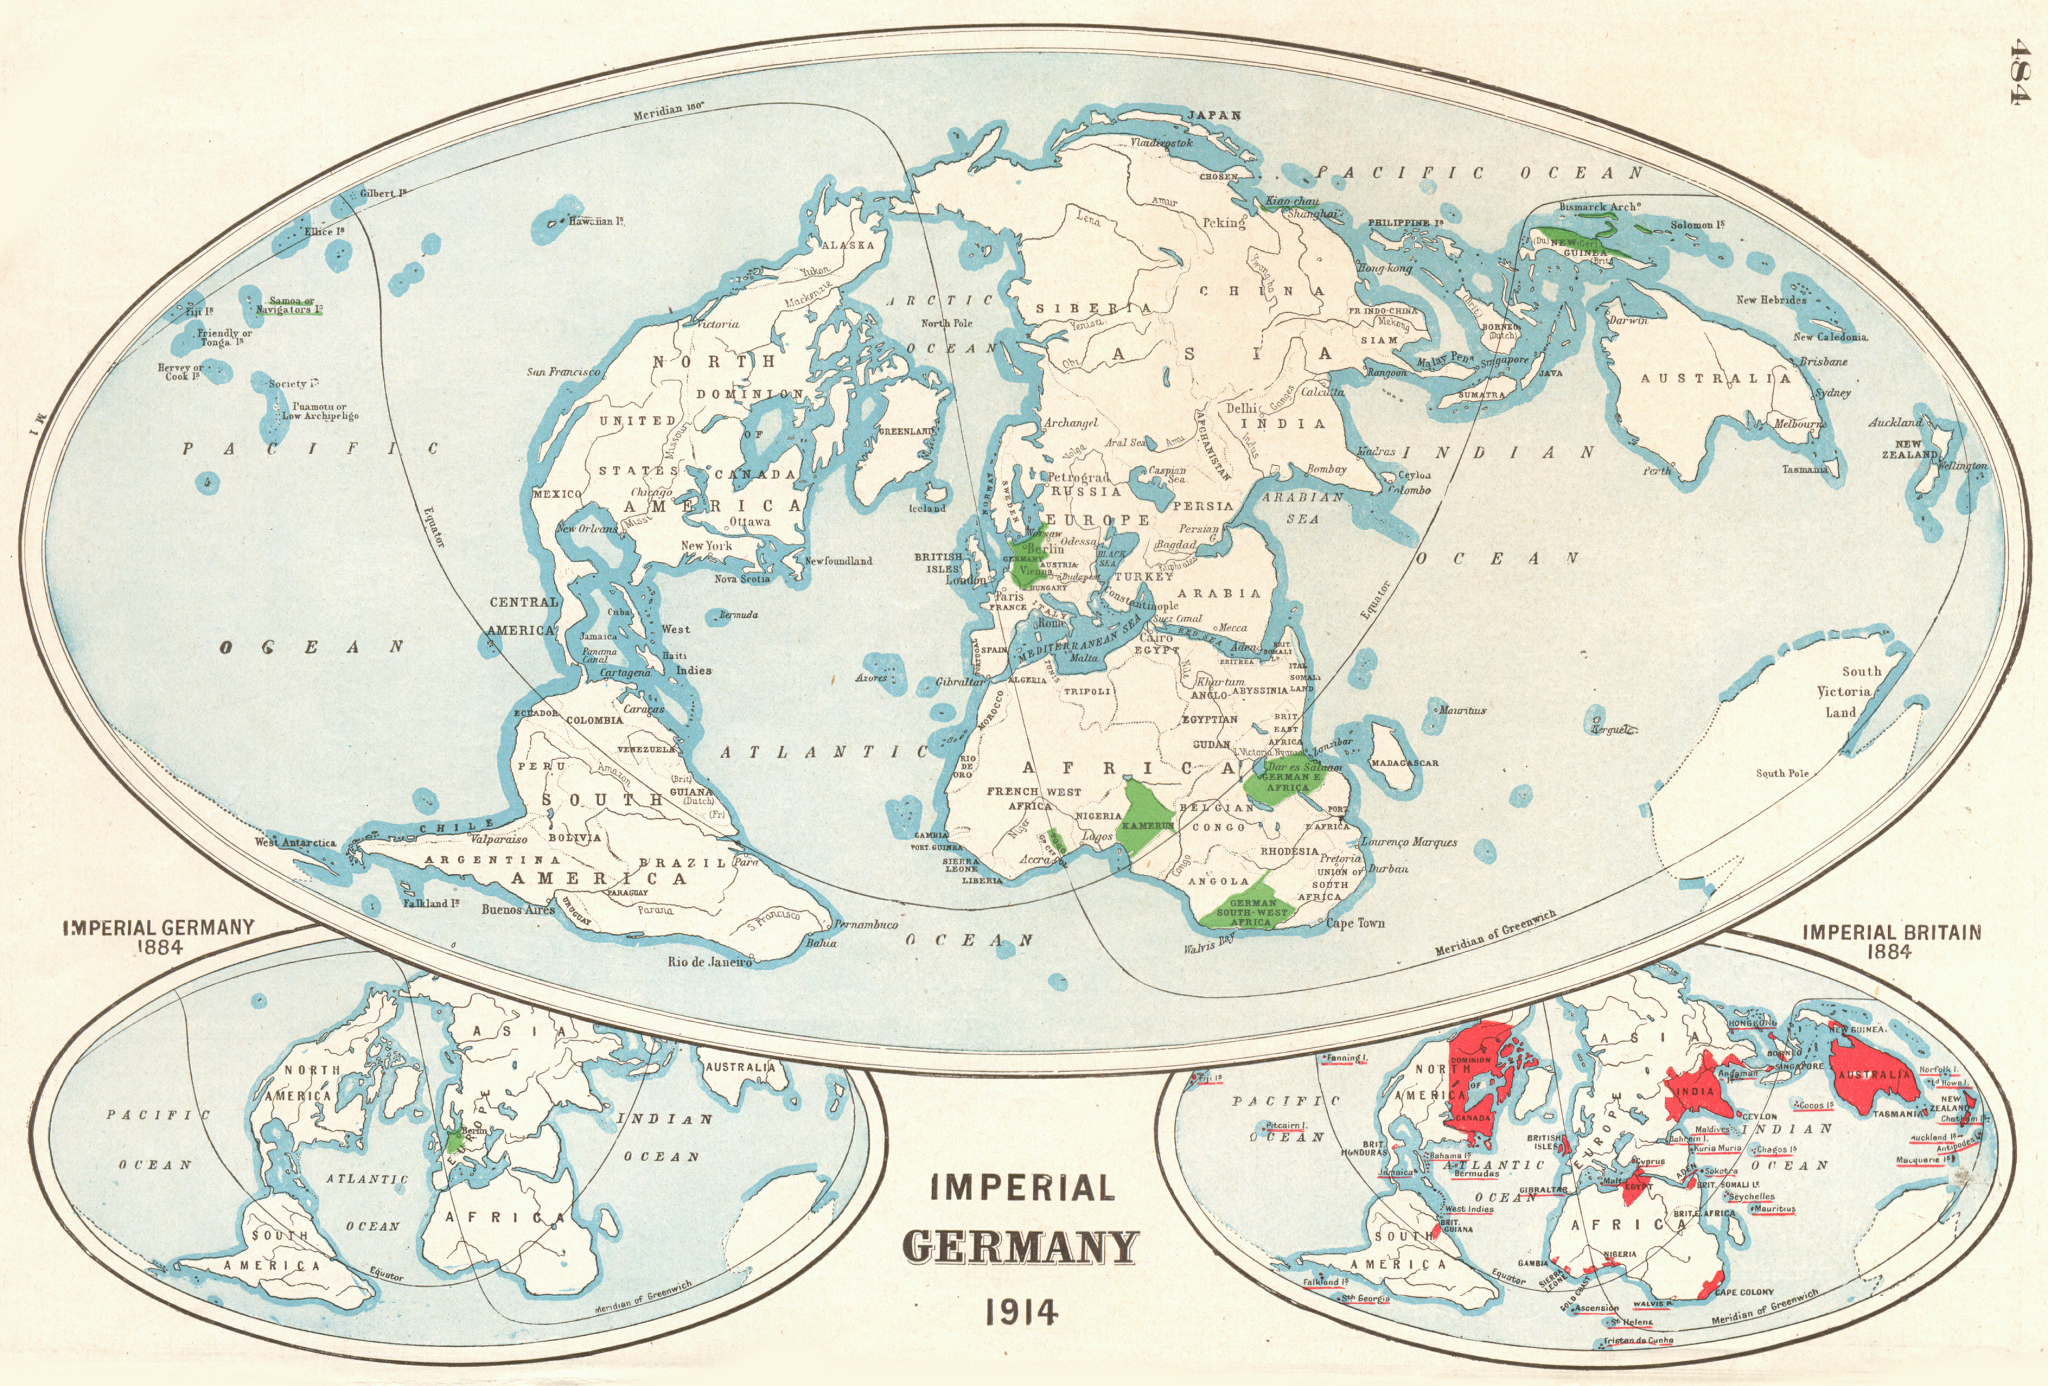 Associate Product GERMAN EMPIRE. Shown in 1884 & 1914. British Empire in 1884. Imperial 1920 map